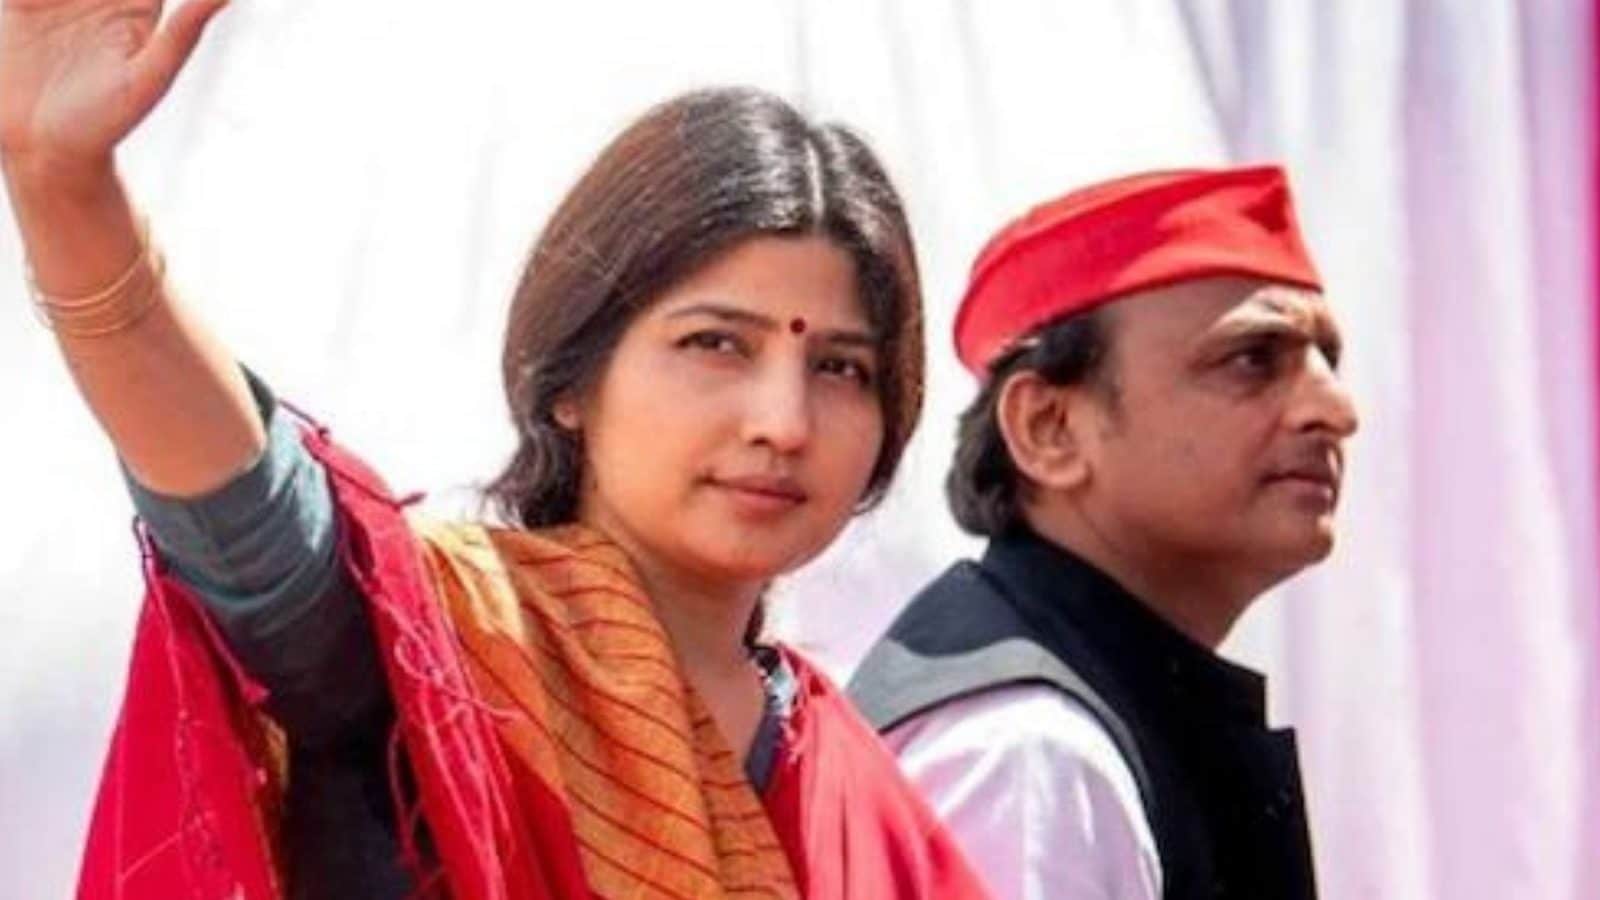 Former MP and Akhilesh Yadav’s Wife, Dimple Yadav, Tests Positive for Covid-19